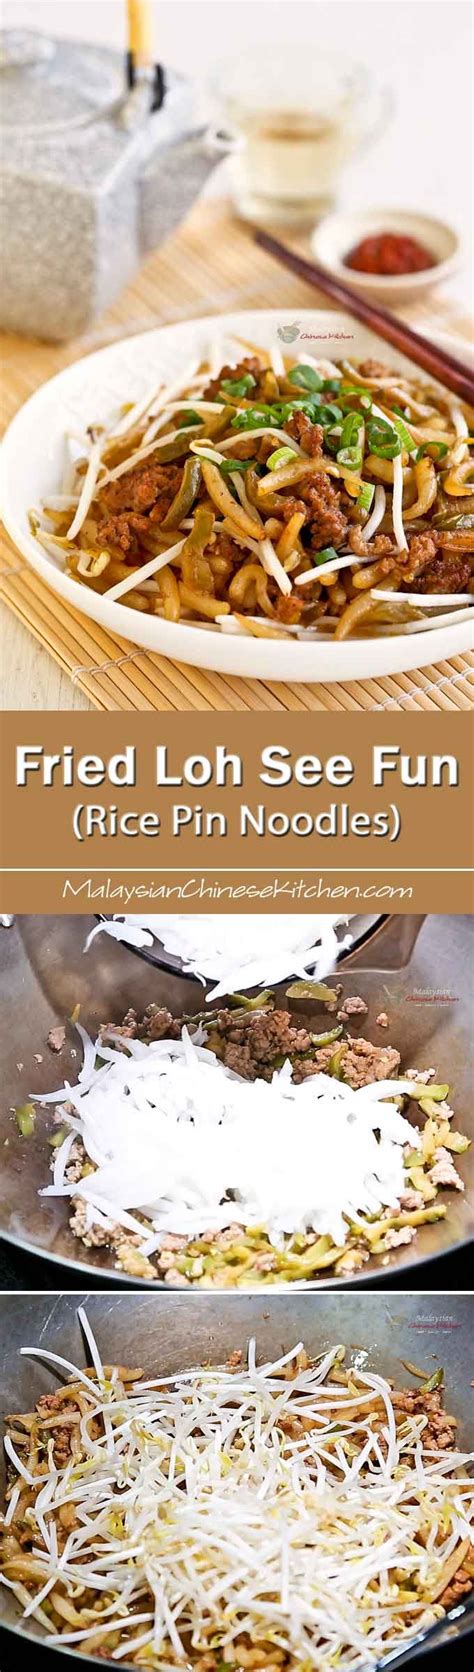 Quick And Easy Fried Loh See Fun Rice Pin Noodles With Minced Pork